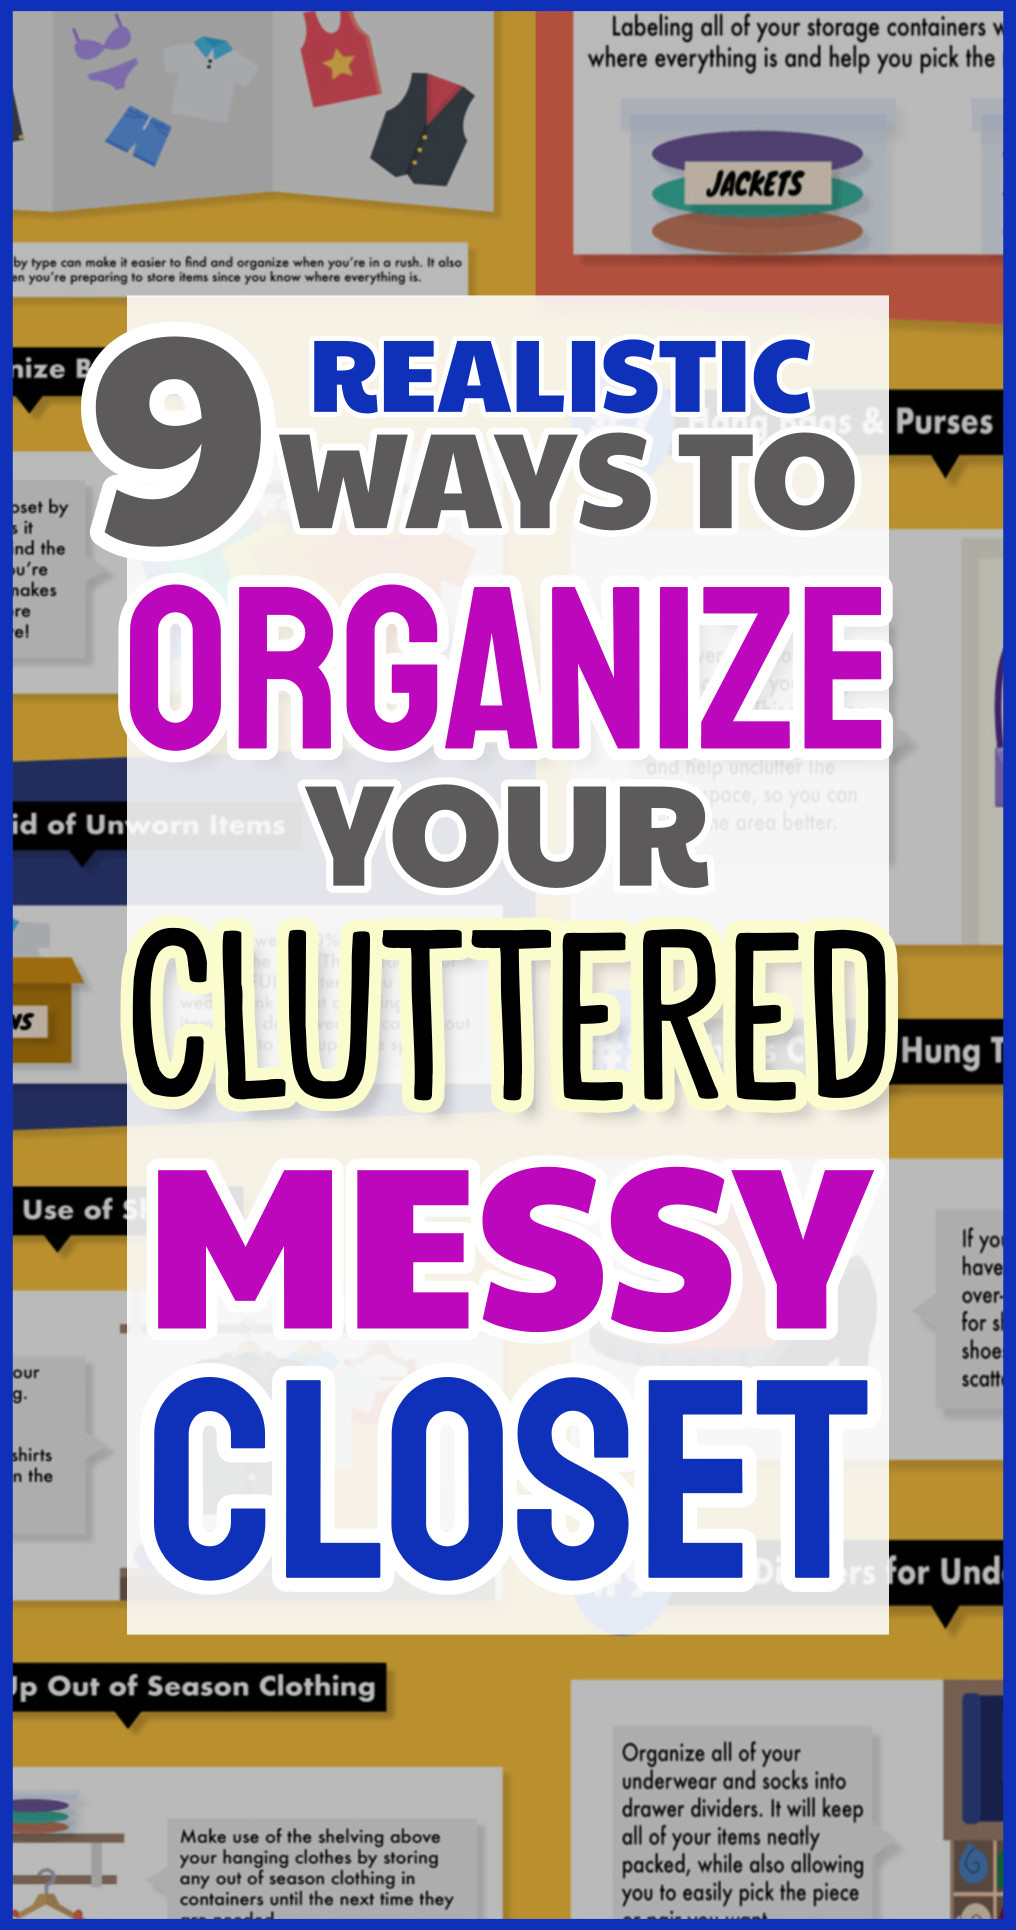 9 realistic ways to organize your cluttered messy closet